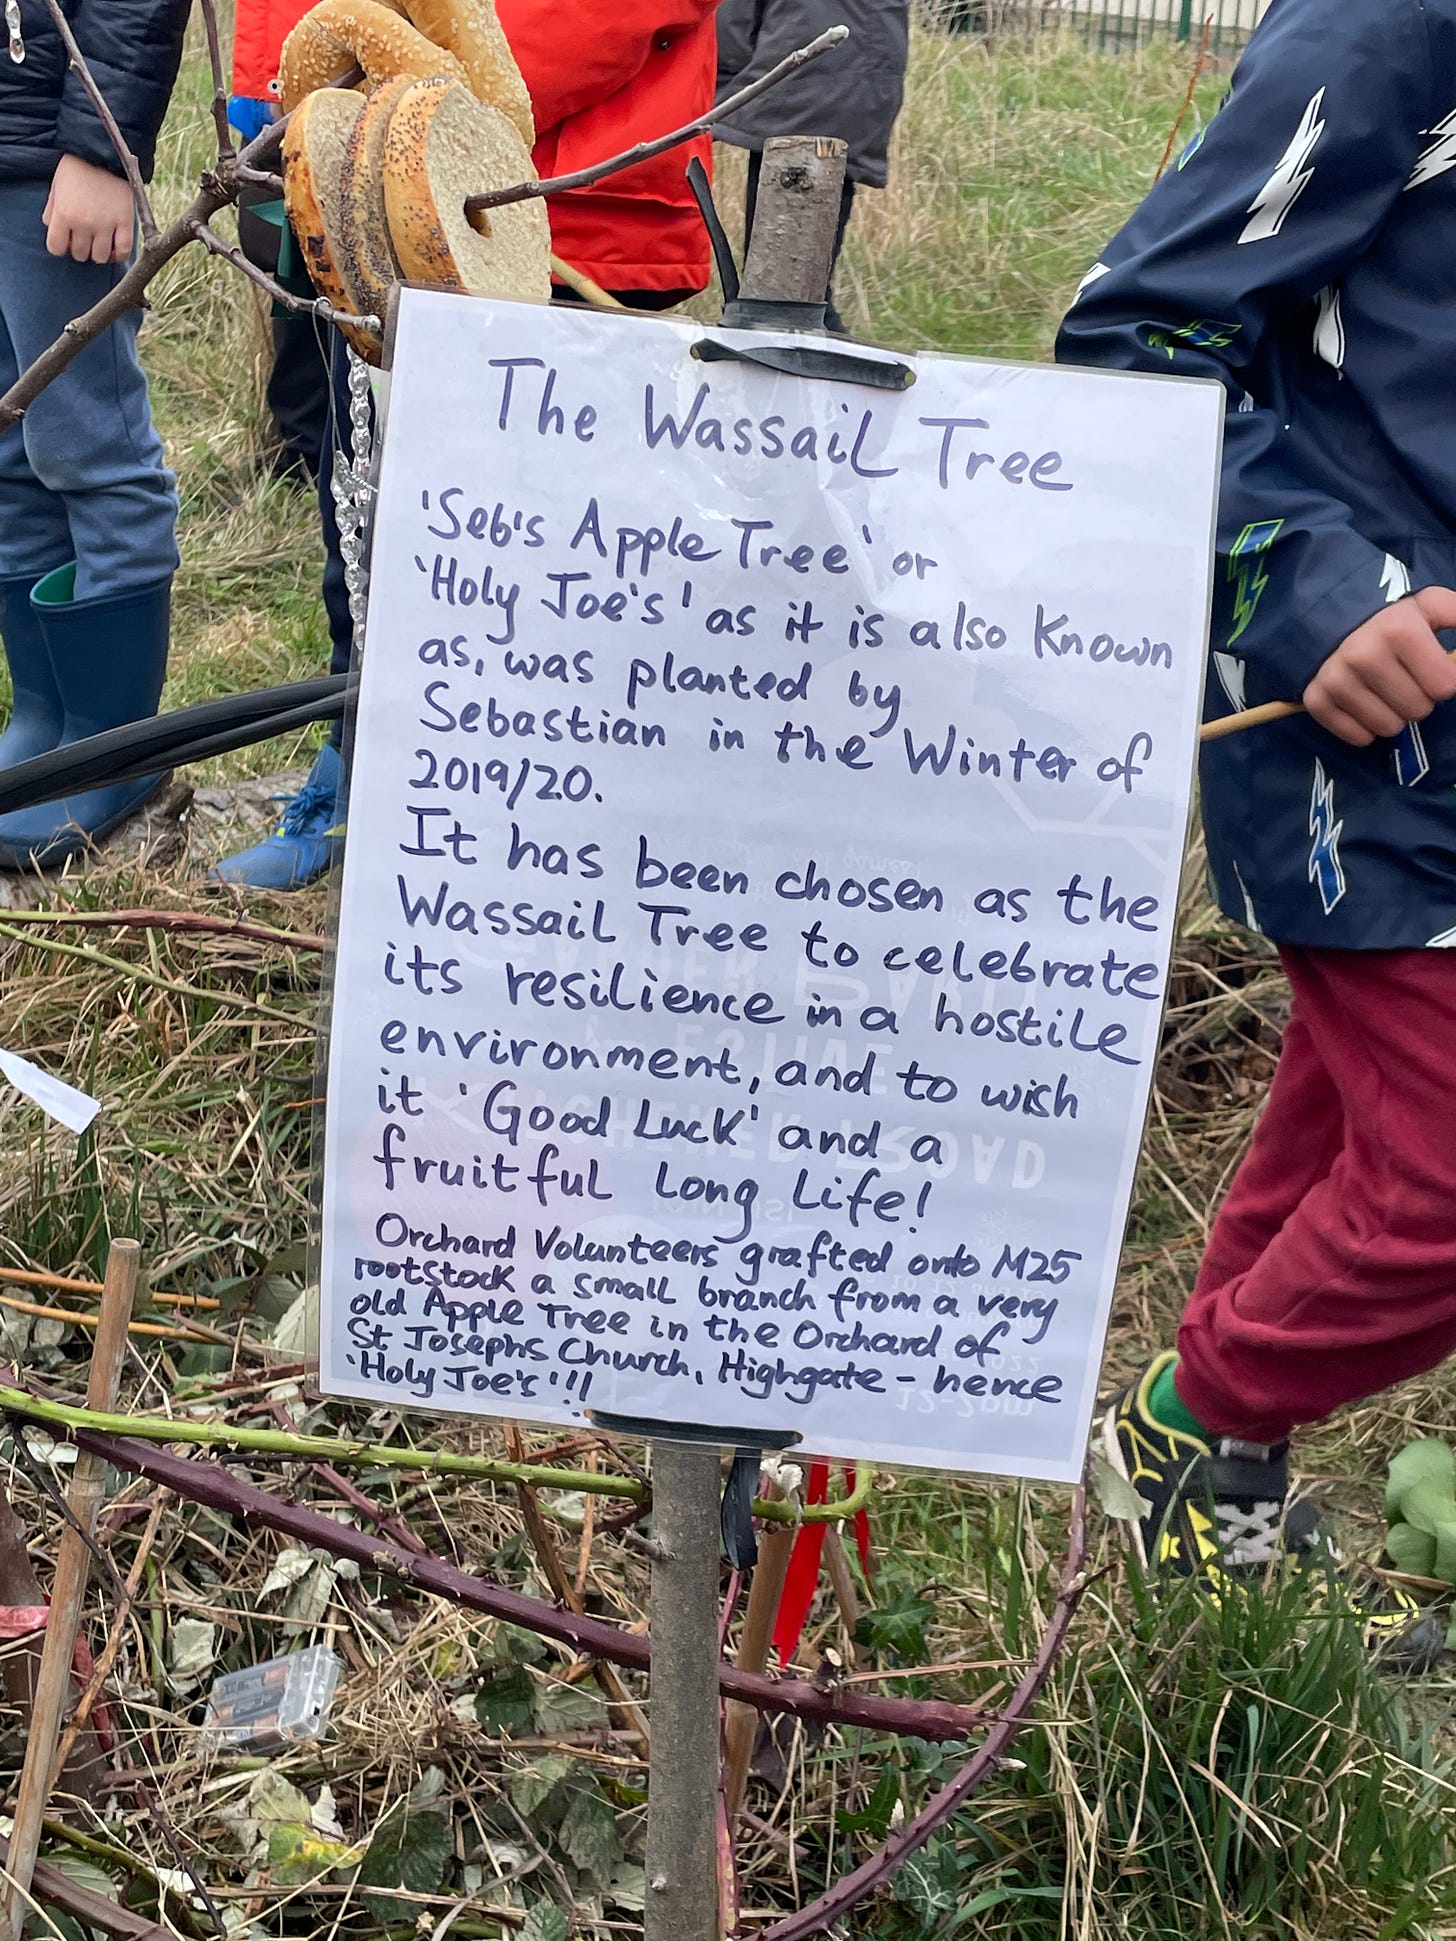 Text on a sign attached to a tree: The Wassail Tree. Seb's Apple Tree, or Holy Joe's as it is also known, was planted by Sebastian in the Winter of 2019/2020. It has been chosen as the Wassail Tree to celebrate its resilience in a hostile environment, and to wish it Good luck and a fruitful young life!